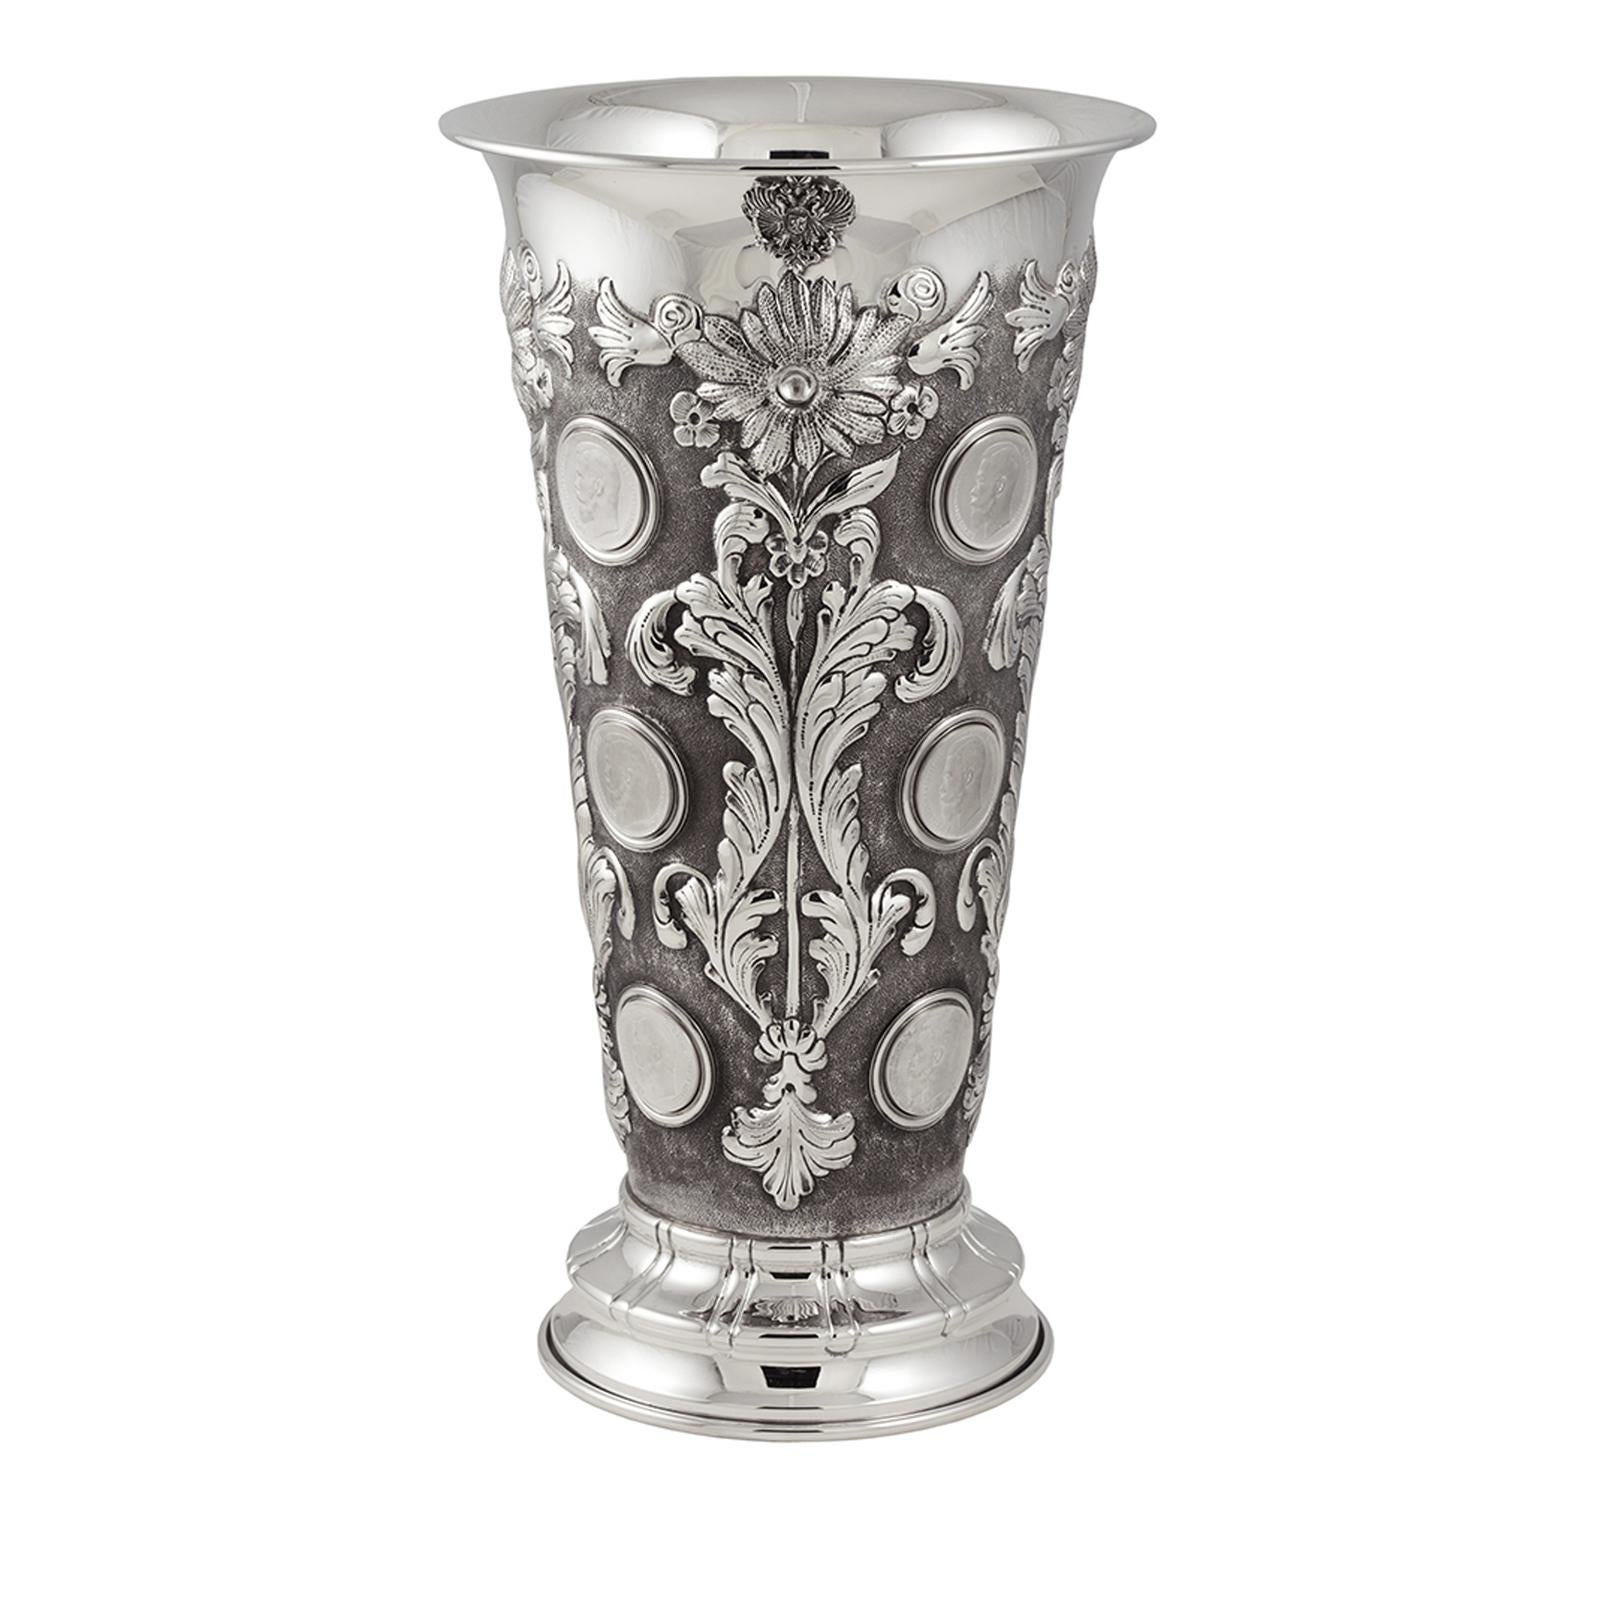 This magnificent vase is made entirely in silver and inspired by the Russian style. The conic, simple shape of the vase rests on a small plinth and is adorned throughout with twelve coin-like bas-relief decorations depicting the profile of Tzar